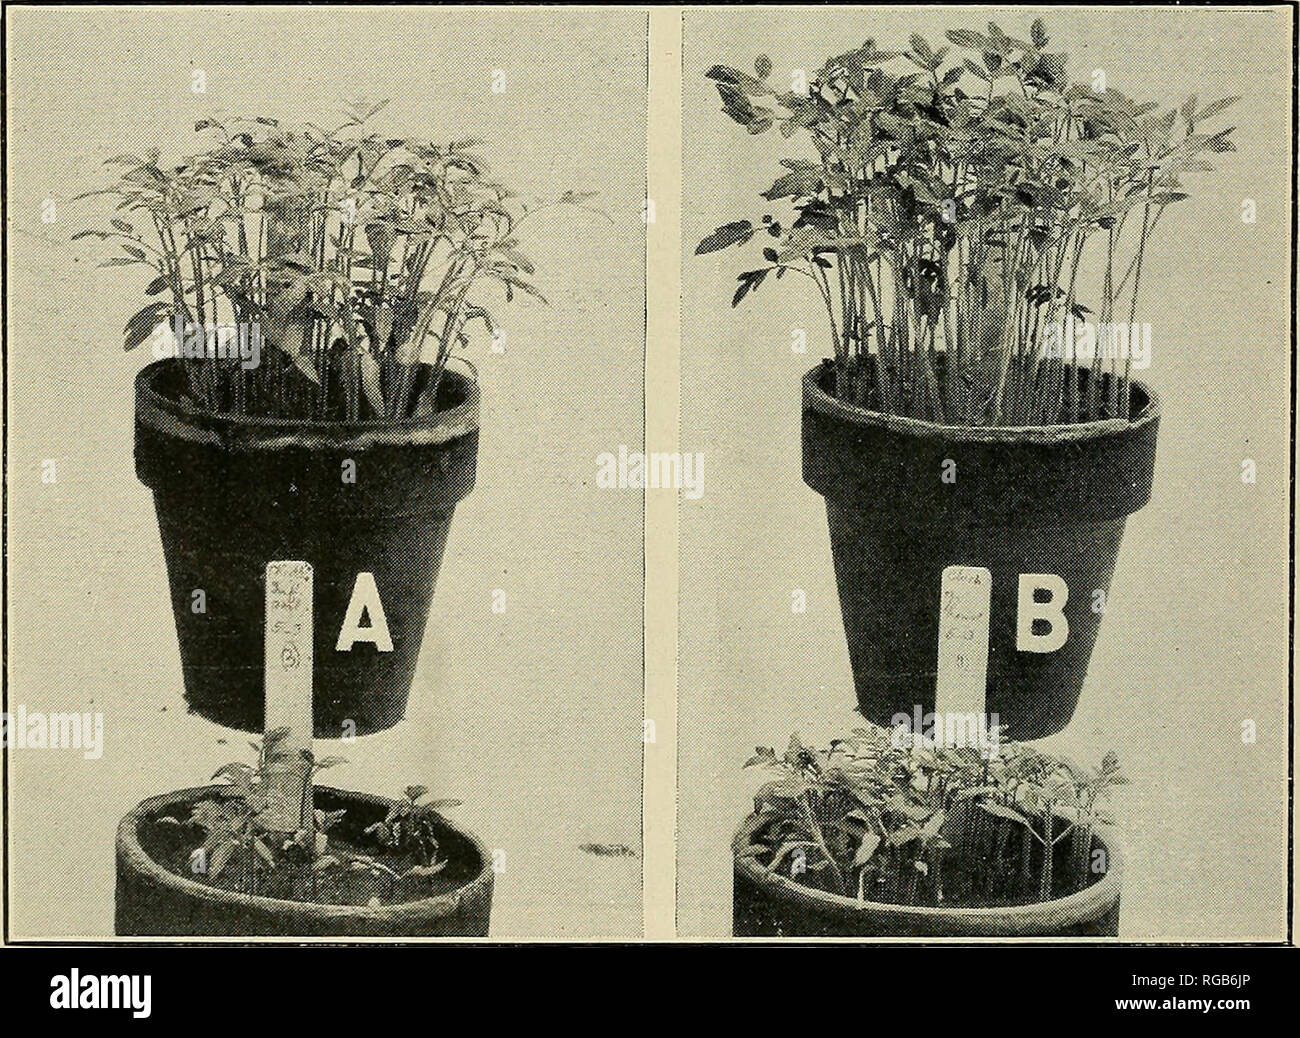 . Bulletin of the U.S. Department of Agriculture. Agriculture; Agriculture. Fig. I.—Lettuce Plants from Bench Sections Nos. 3 and 4, Shown in Plate III, Figure 2. Note (A) the white, healthy, vigorous root systems from plants grown in treated section No. 3, as compared with (£, C, and D) the nematode in£e4ted and blackened, Rhizoctonia-diseased roots from untreated section No. 4.. Fig. 2.—Tomato Plants Grown in 4-Inch Pots of (A.) Treated and Untreated Infested Soil as Compared with (B.) Treated and Untreated Fresh Green- house Soil, Experiment Series II. Note the pronounced differences in siz Stock Photo